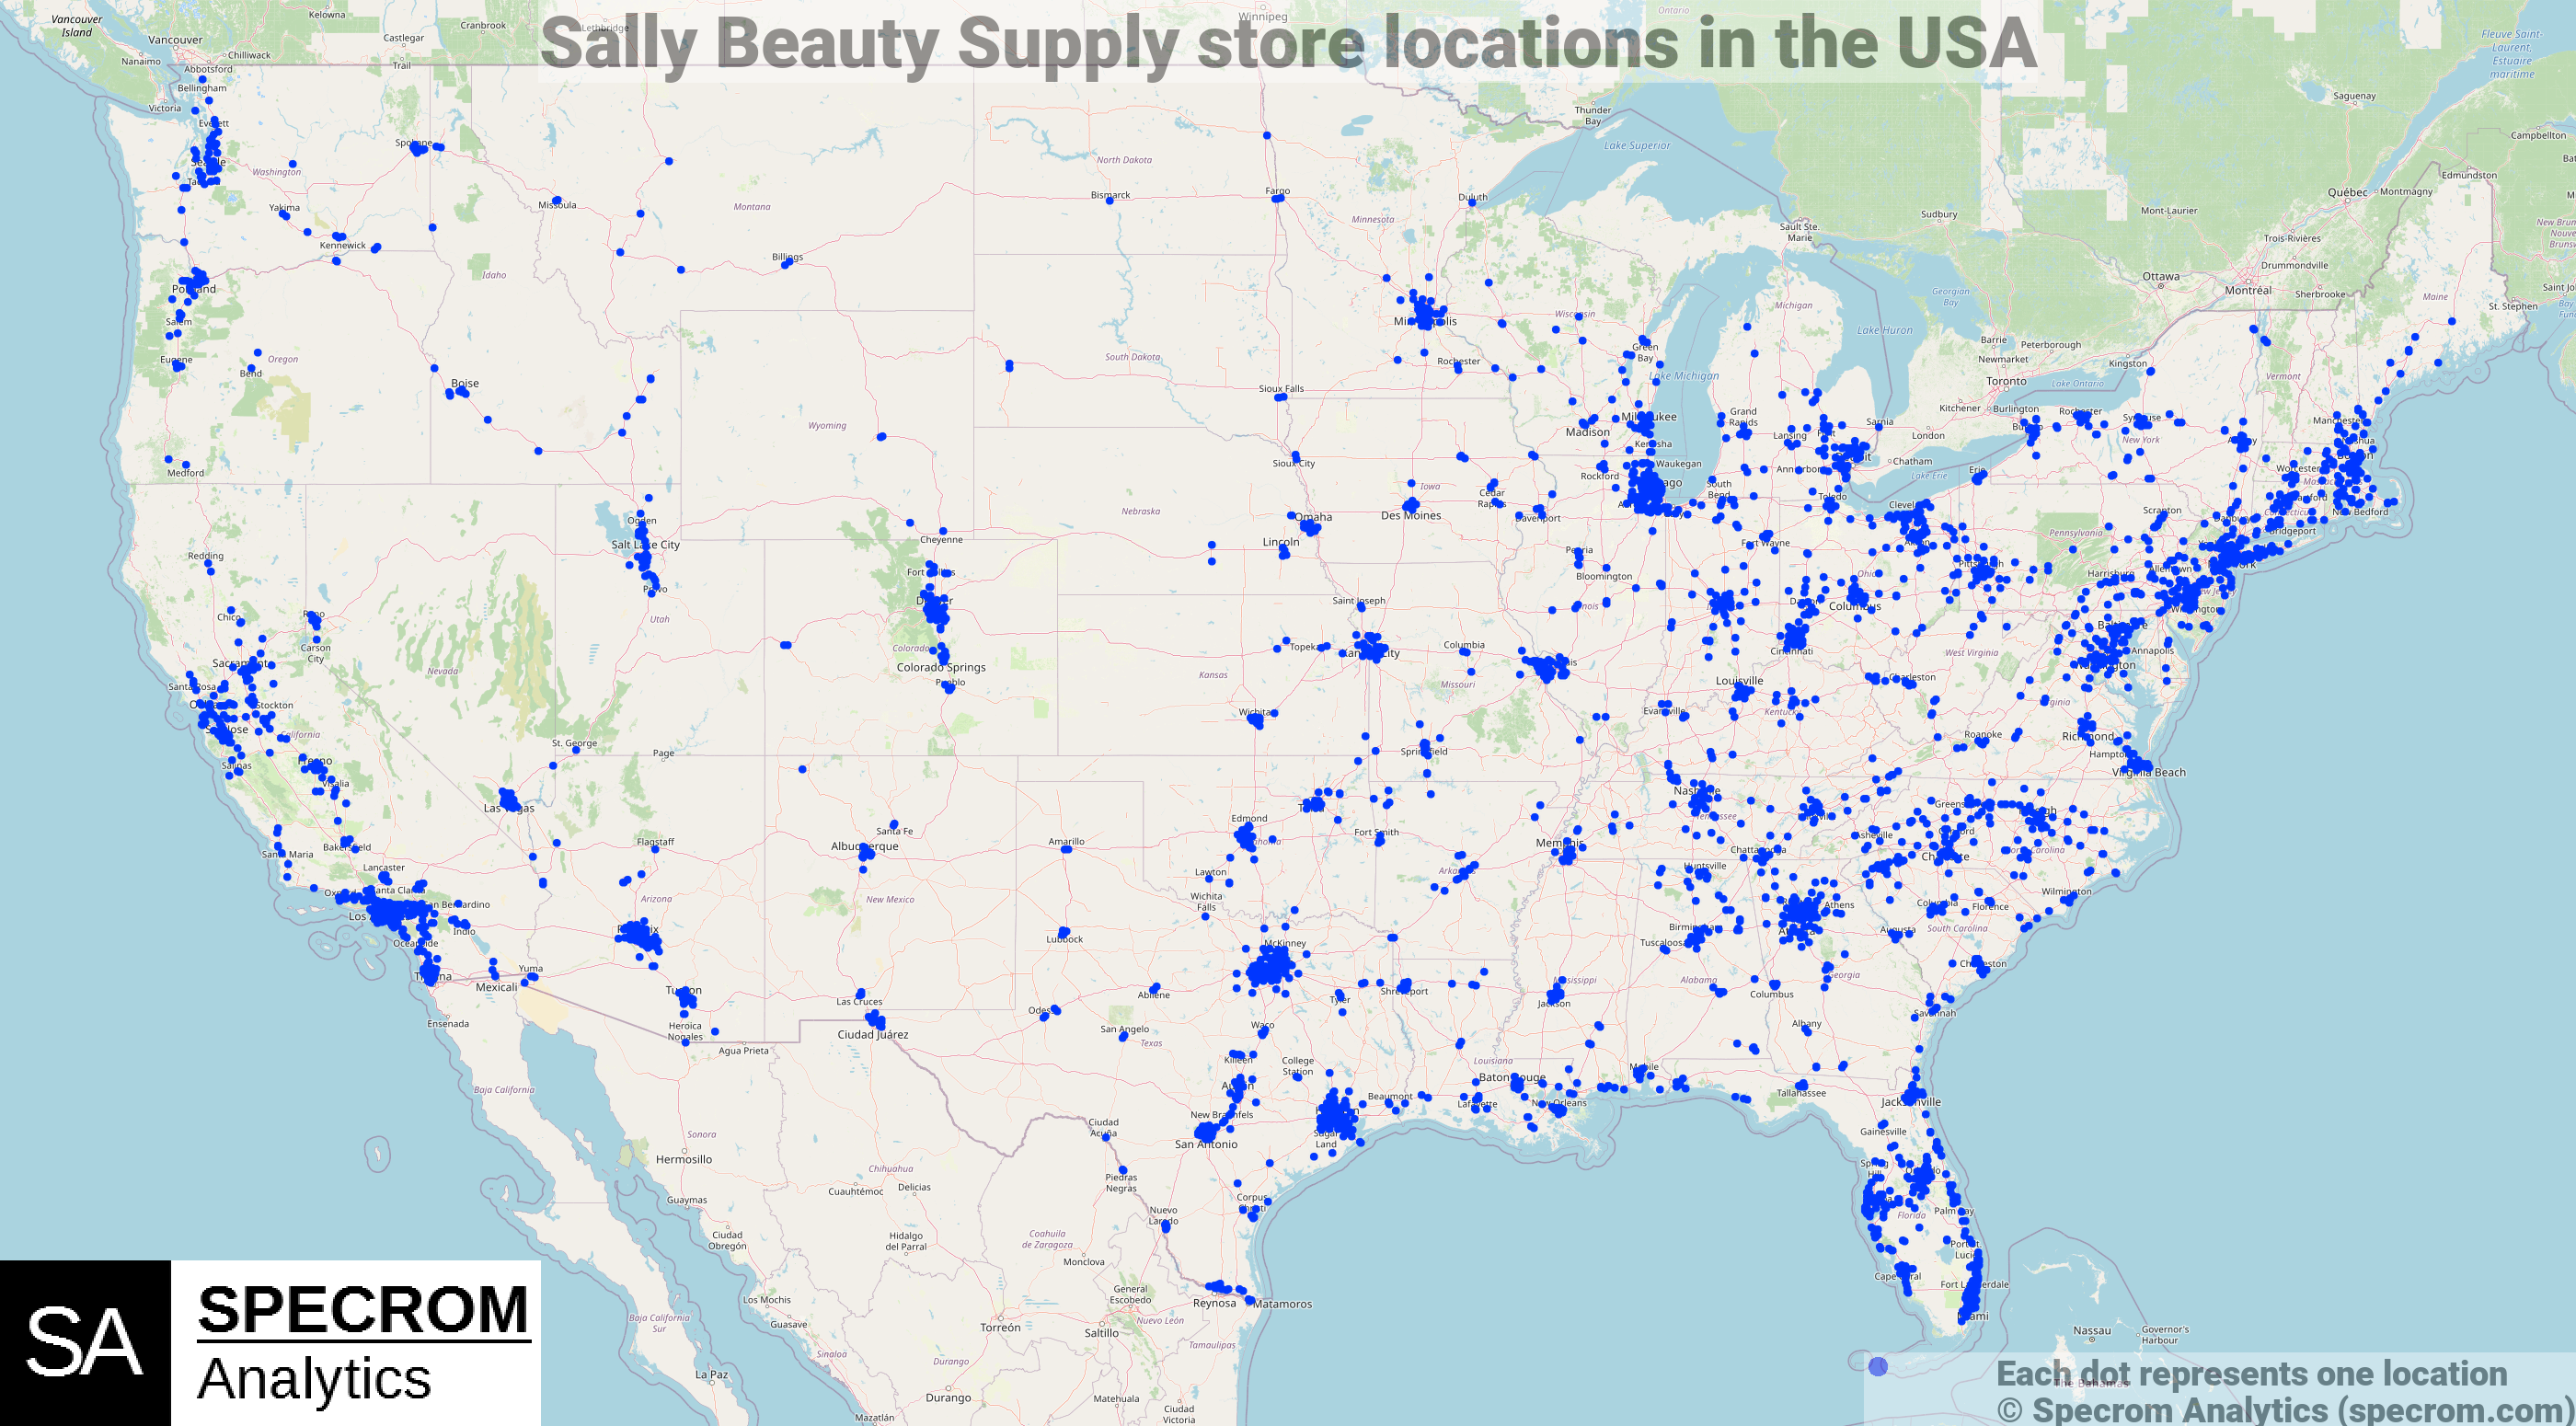 Sally Beauty Supply store locations in the USA